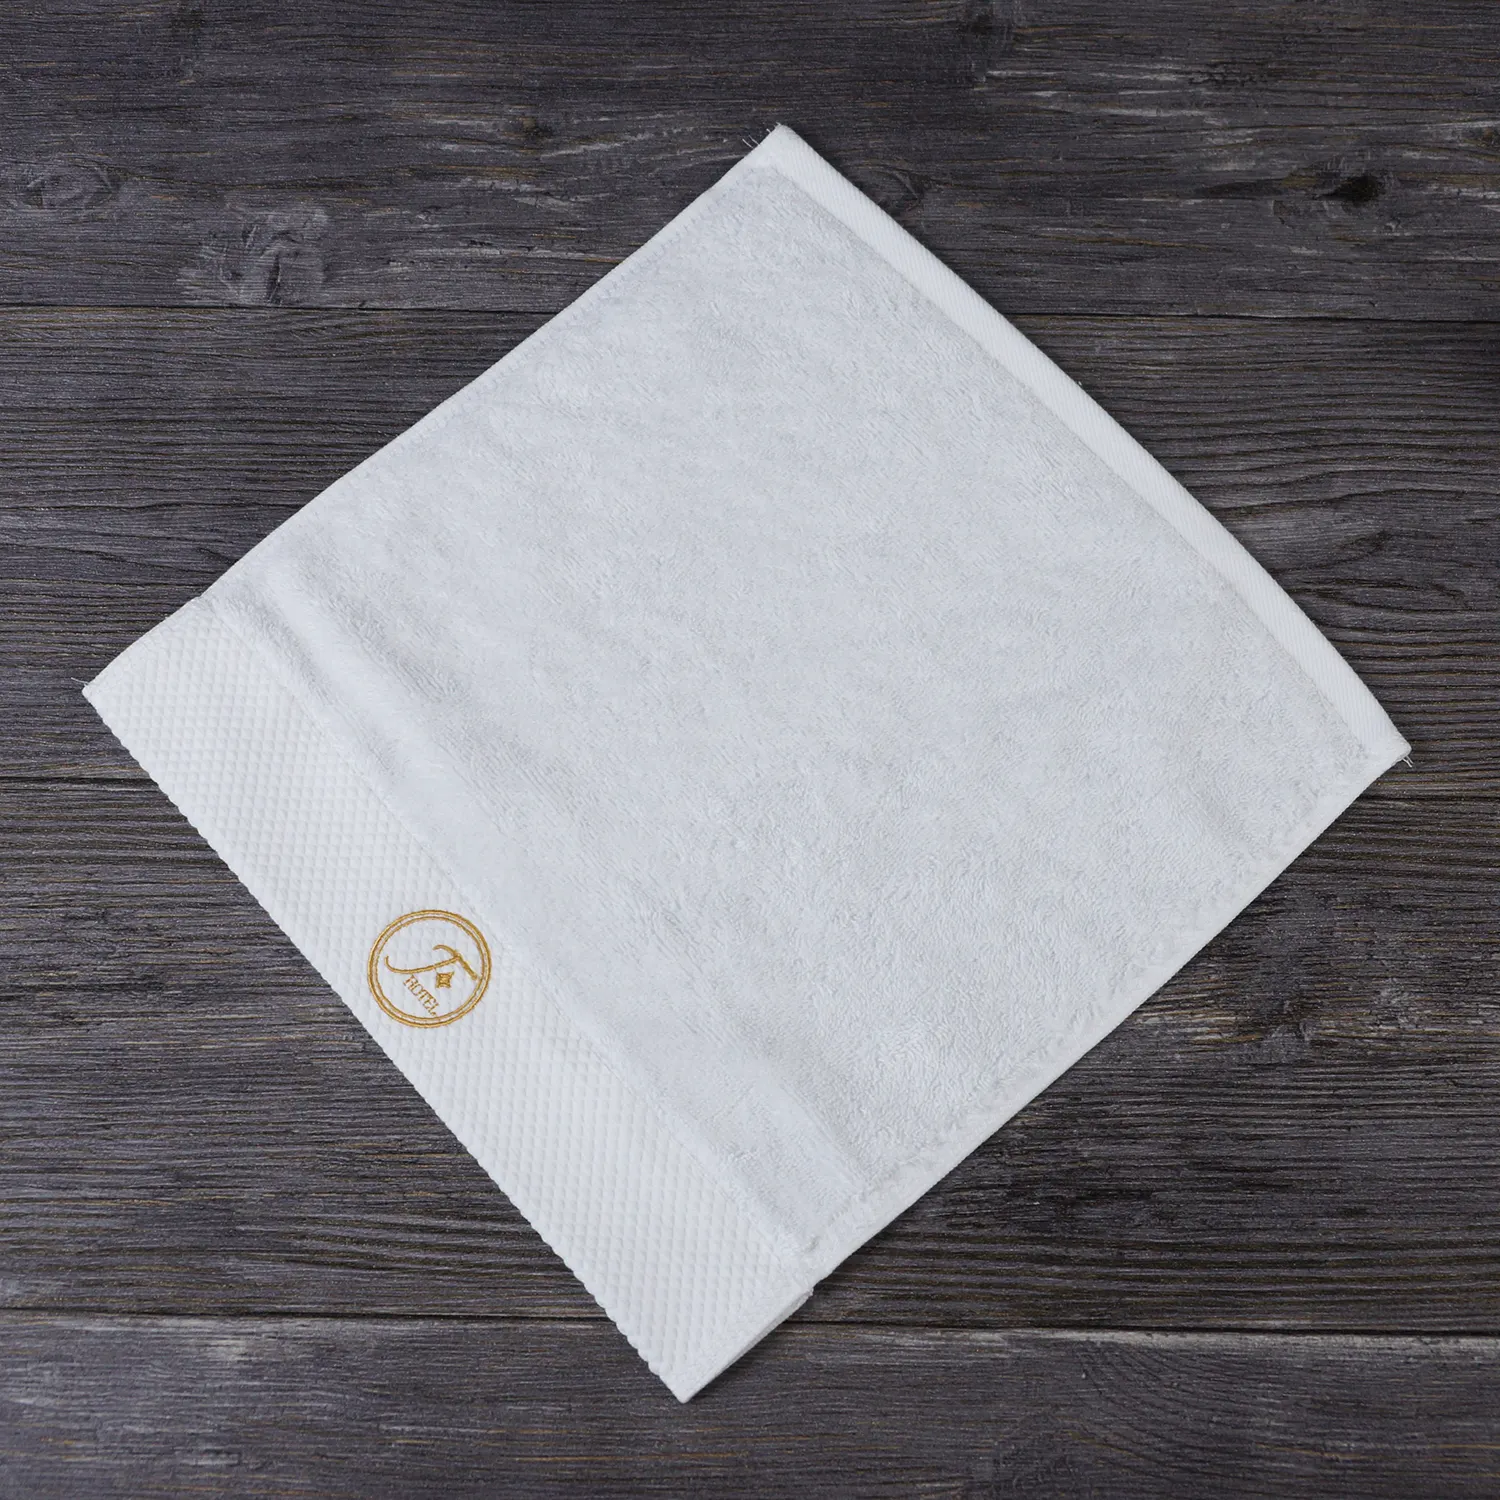 Luxury embroidery face towels 100 cotton customised personalized face towel